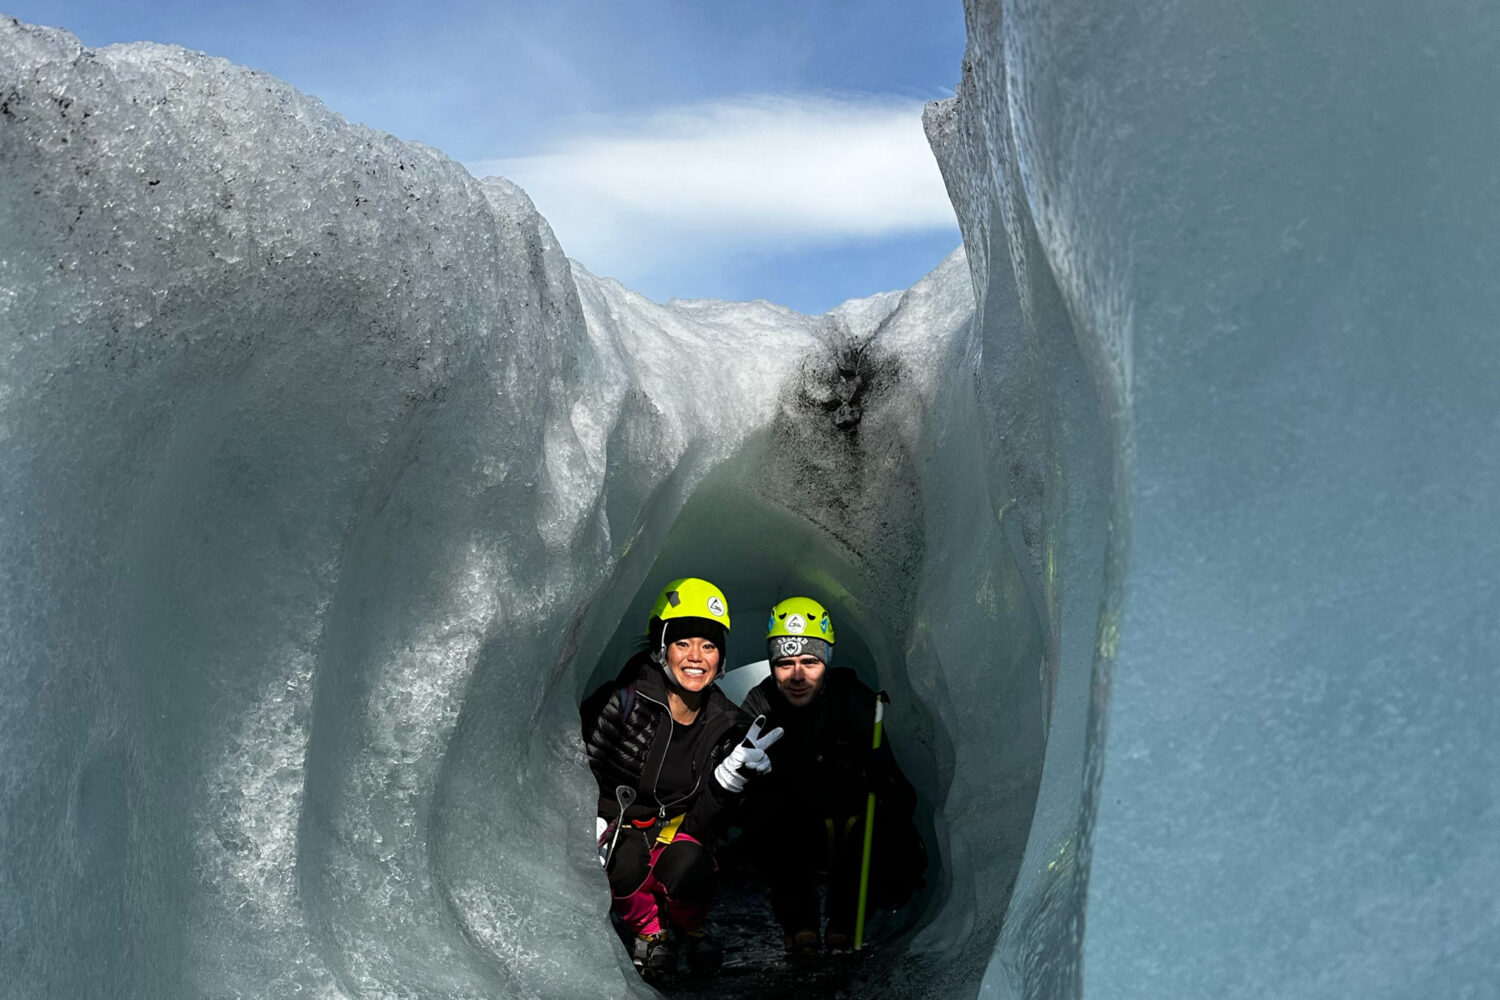 People in a crevasse for a cool photo on the glacier